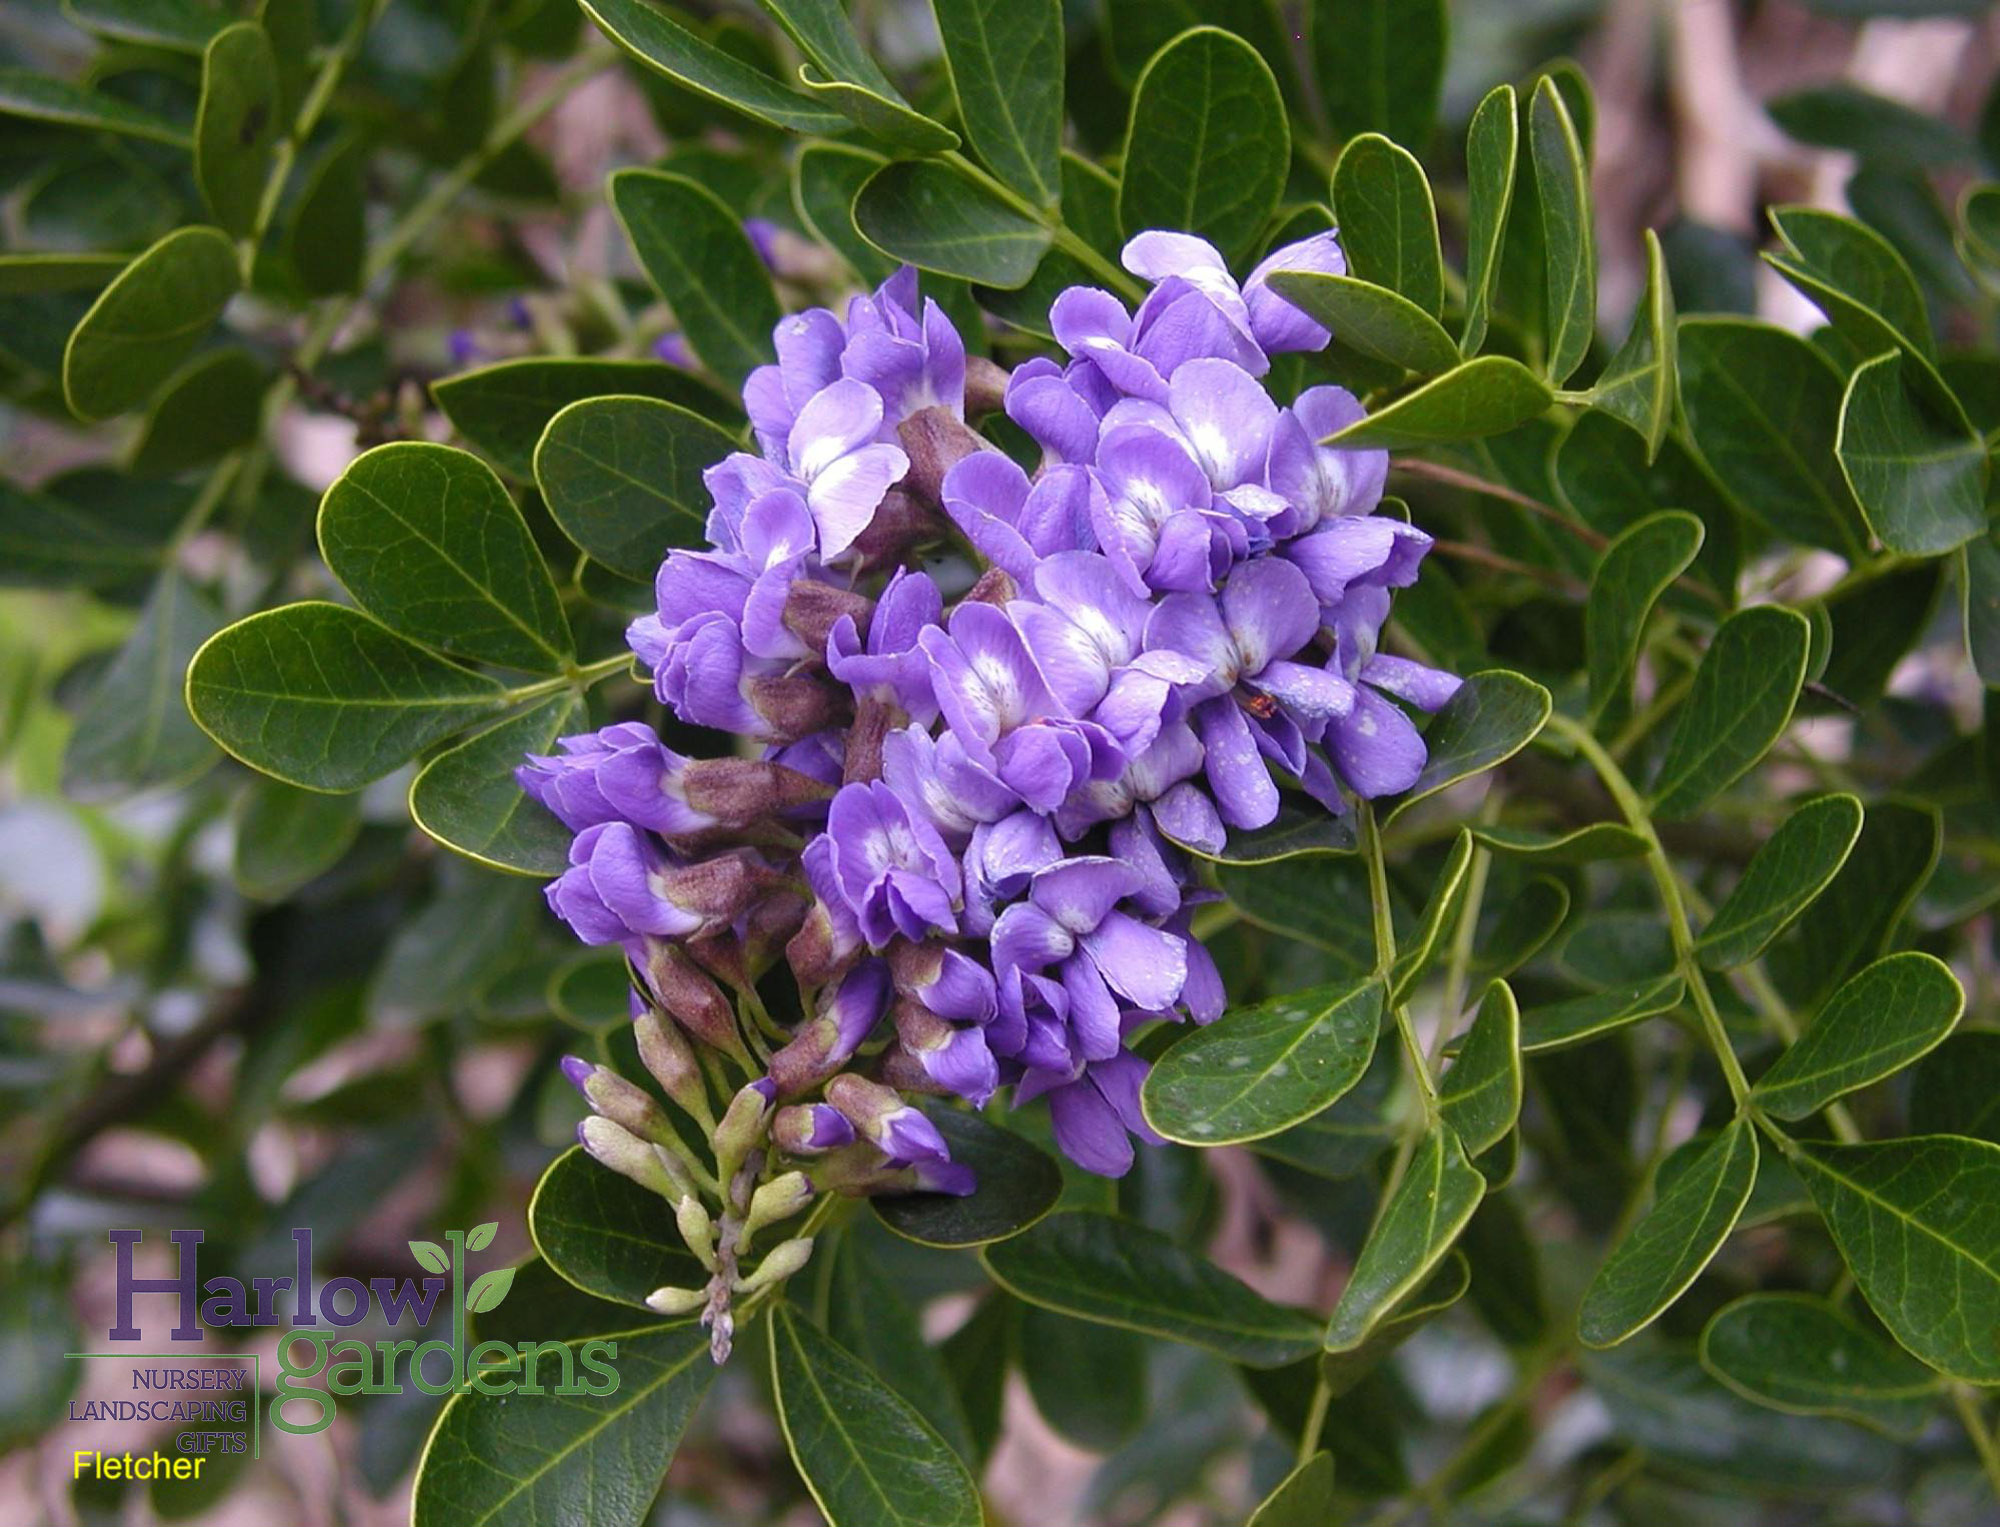 Texas Mountain Laurel for sale at Harlow Gardens Tucson.